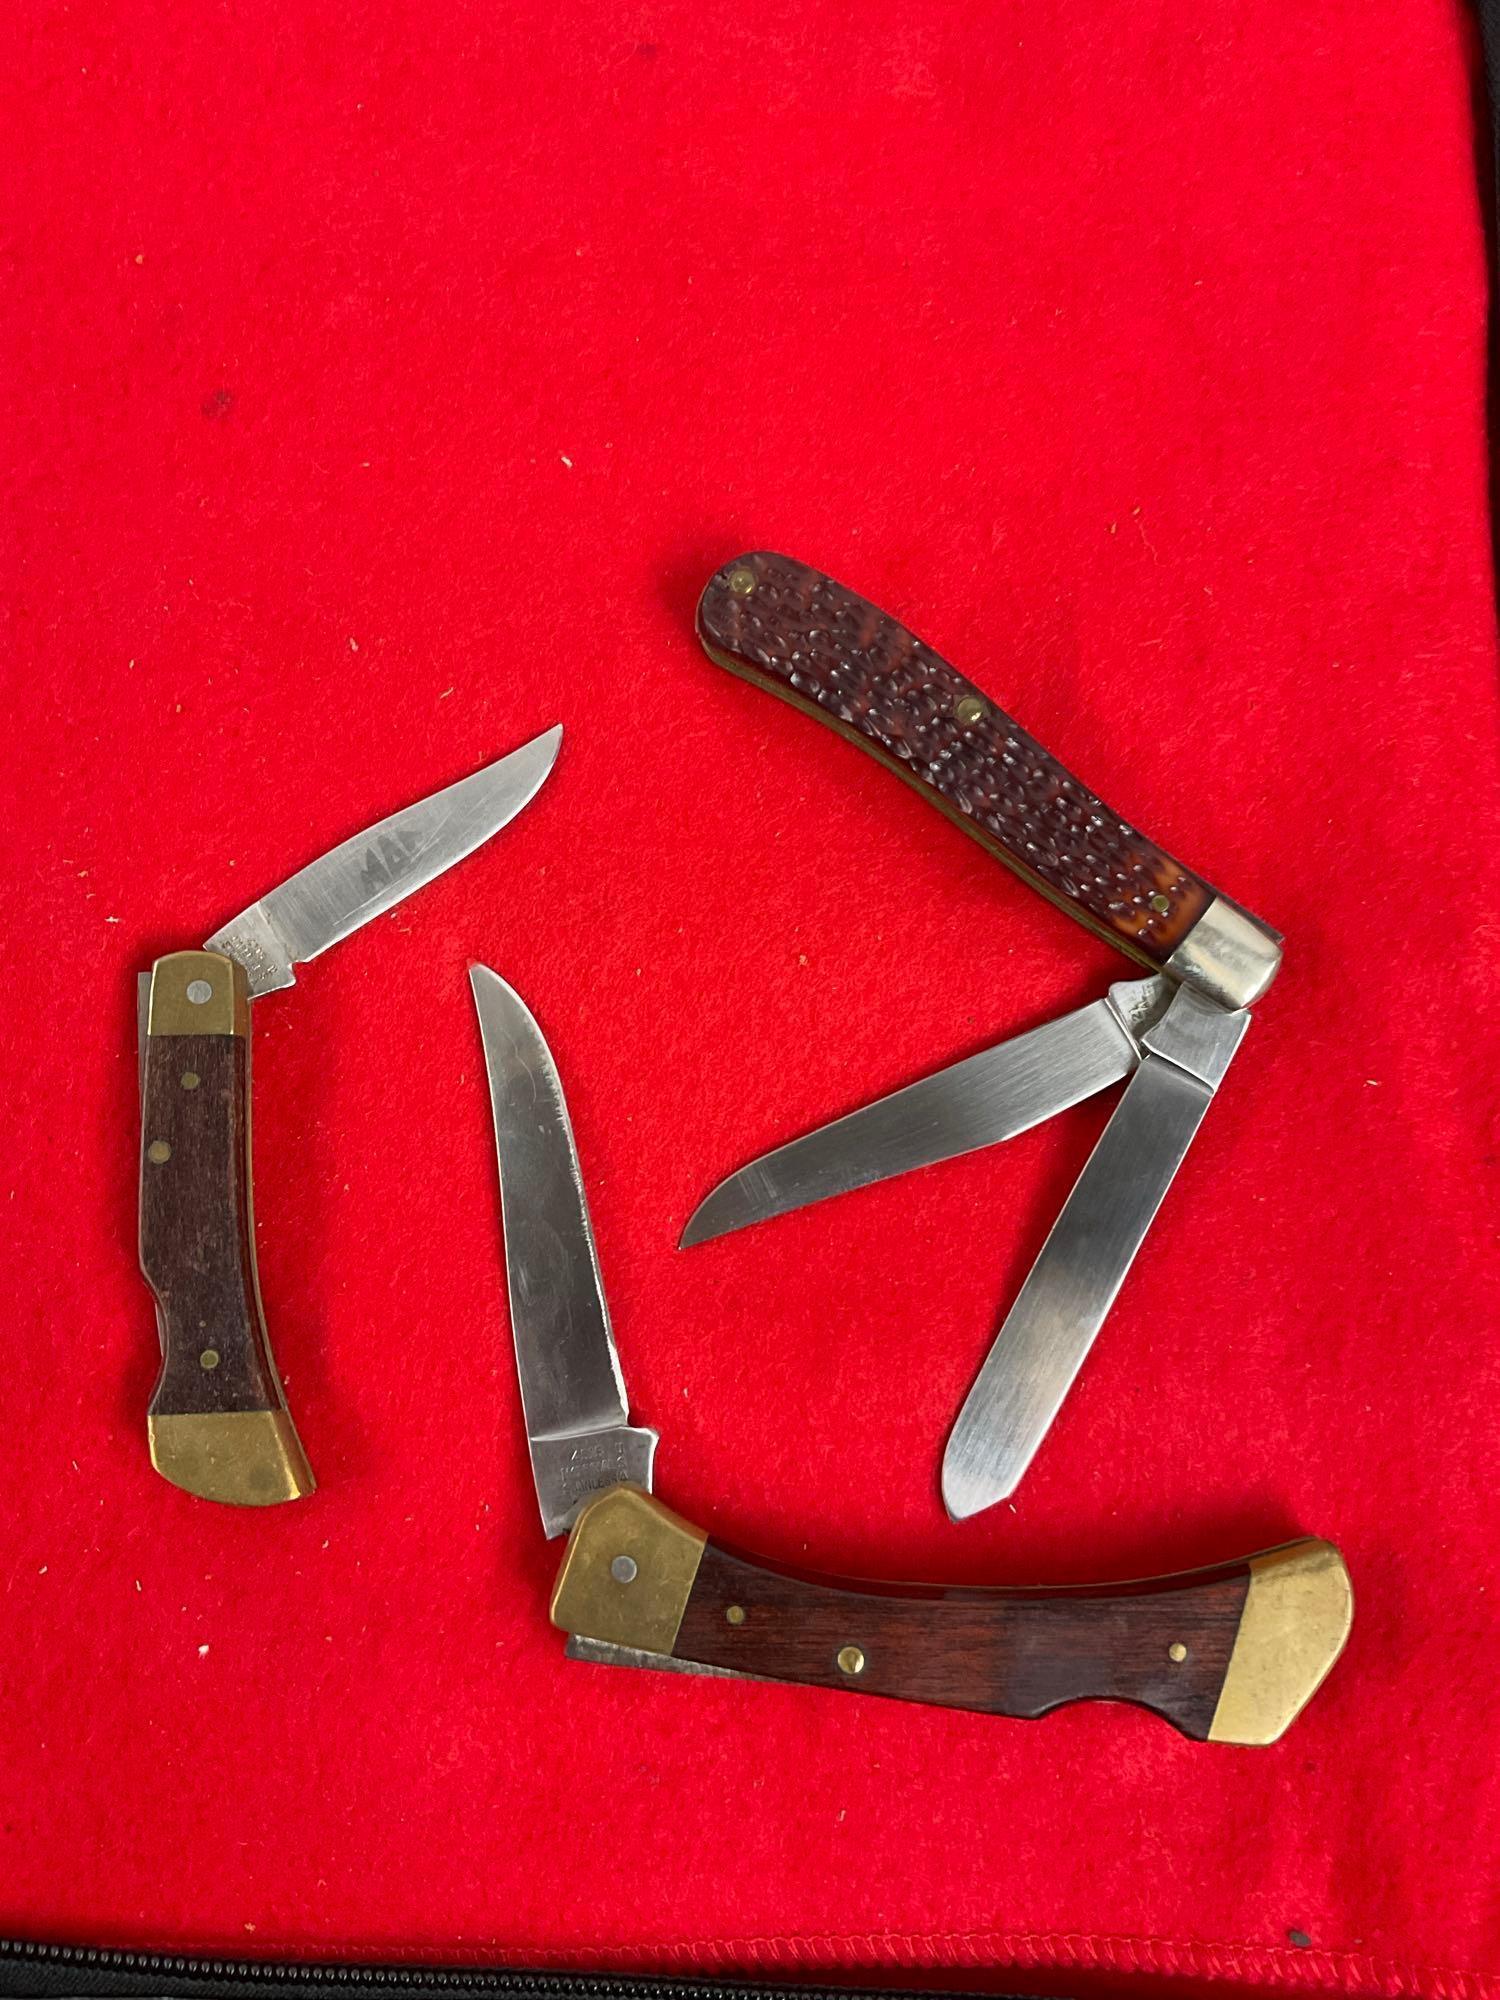 Trio of Frontier Folding Blade Pocket Knives - 1 Knife has 2 blades - See pics